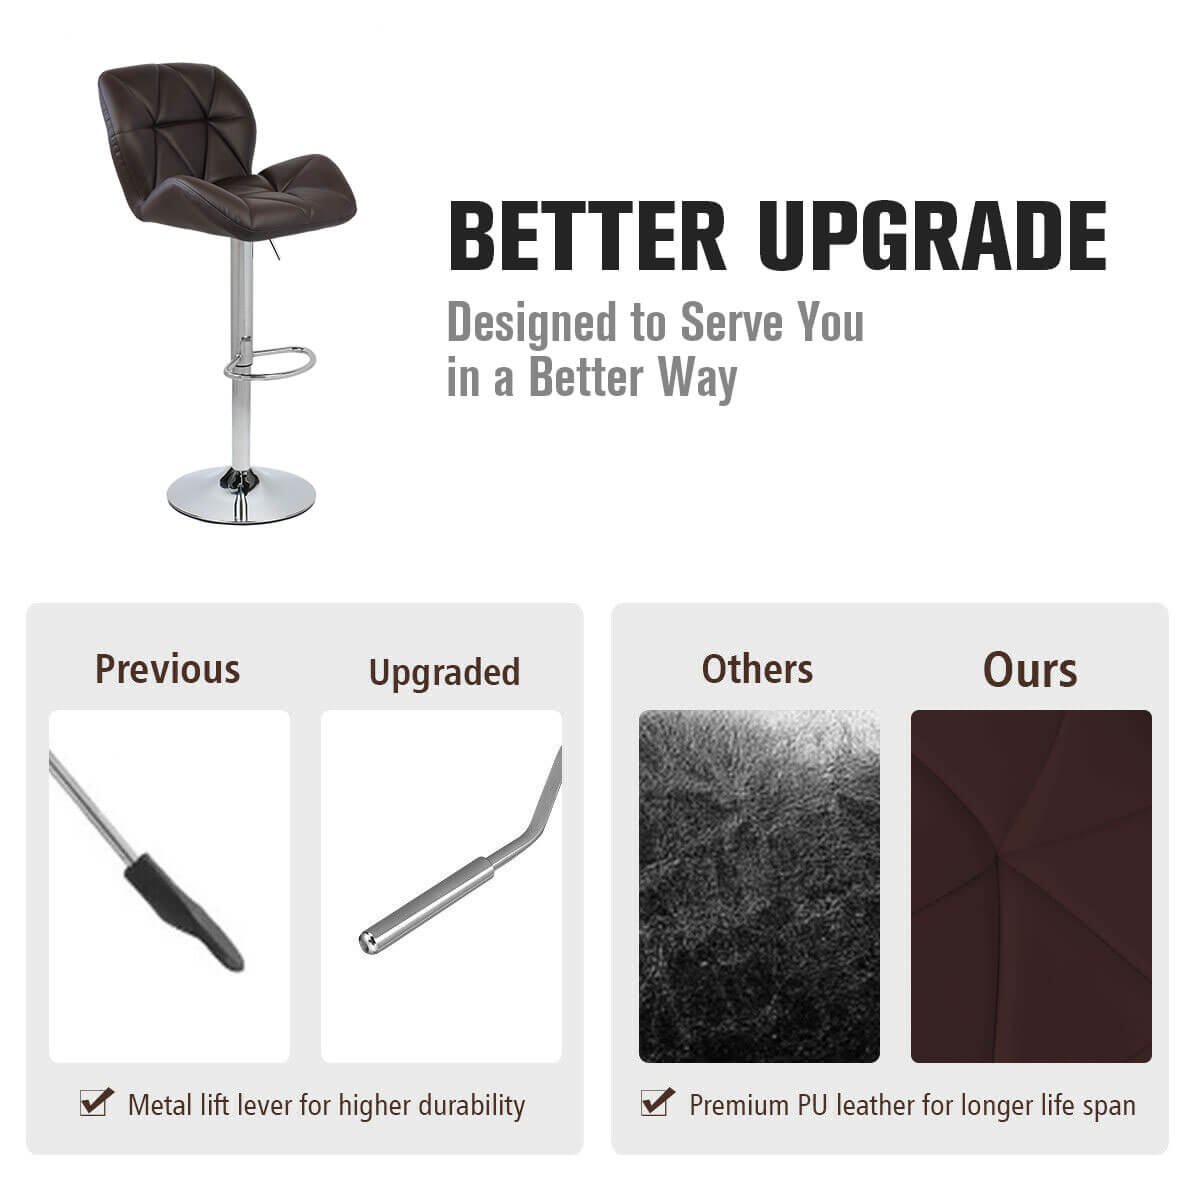 Elecwish brown bar stool OW001 has better upgrade